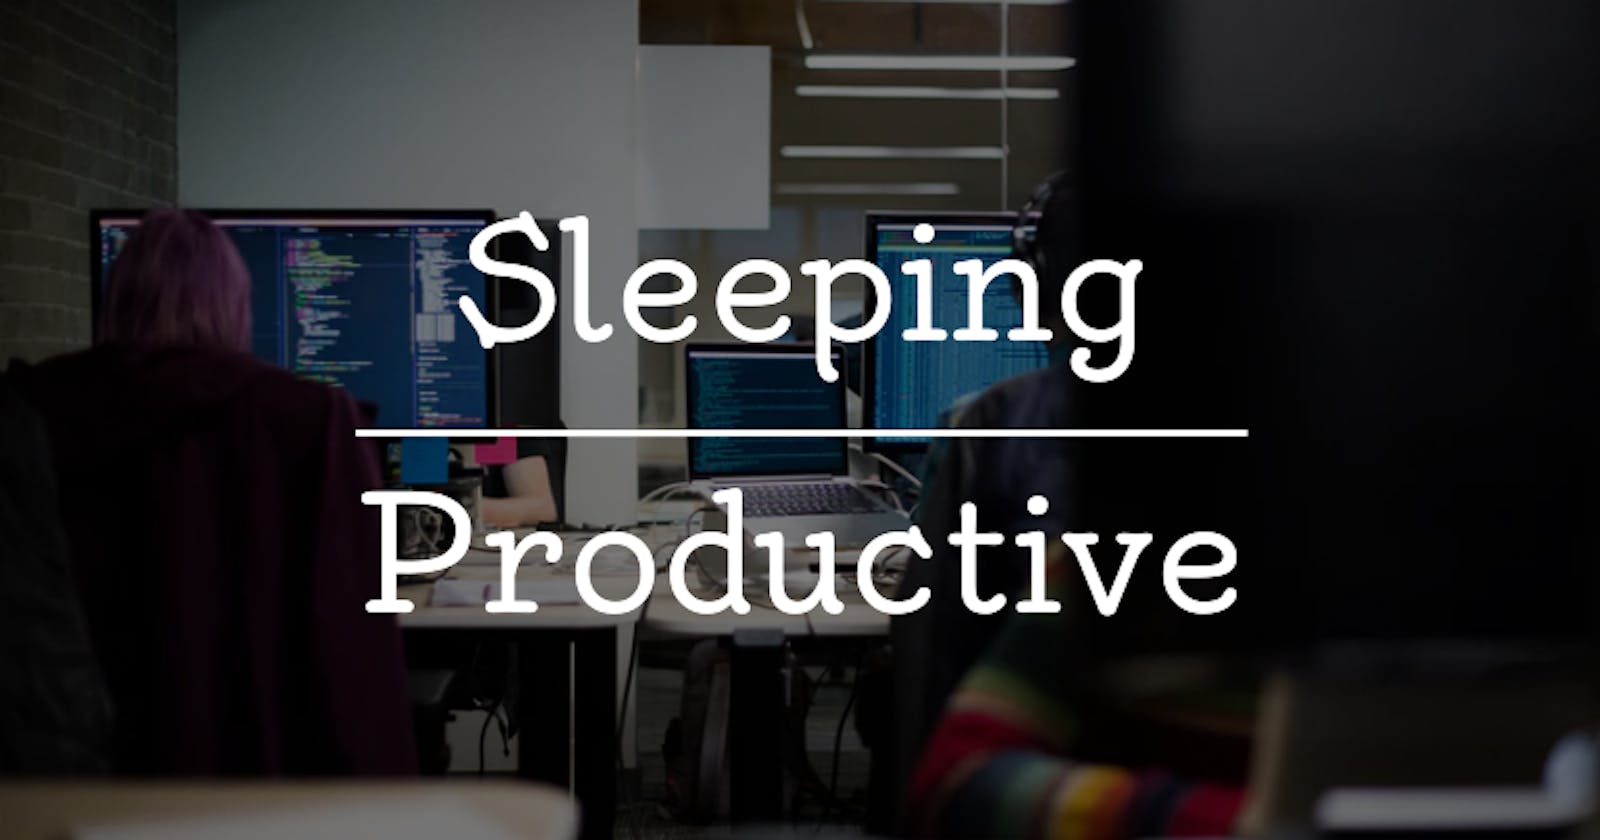 Sleeping each day without making a day productive? What to do?